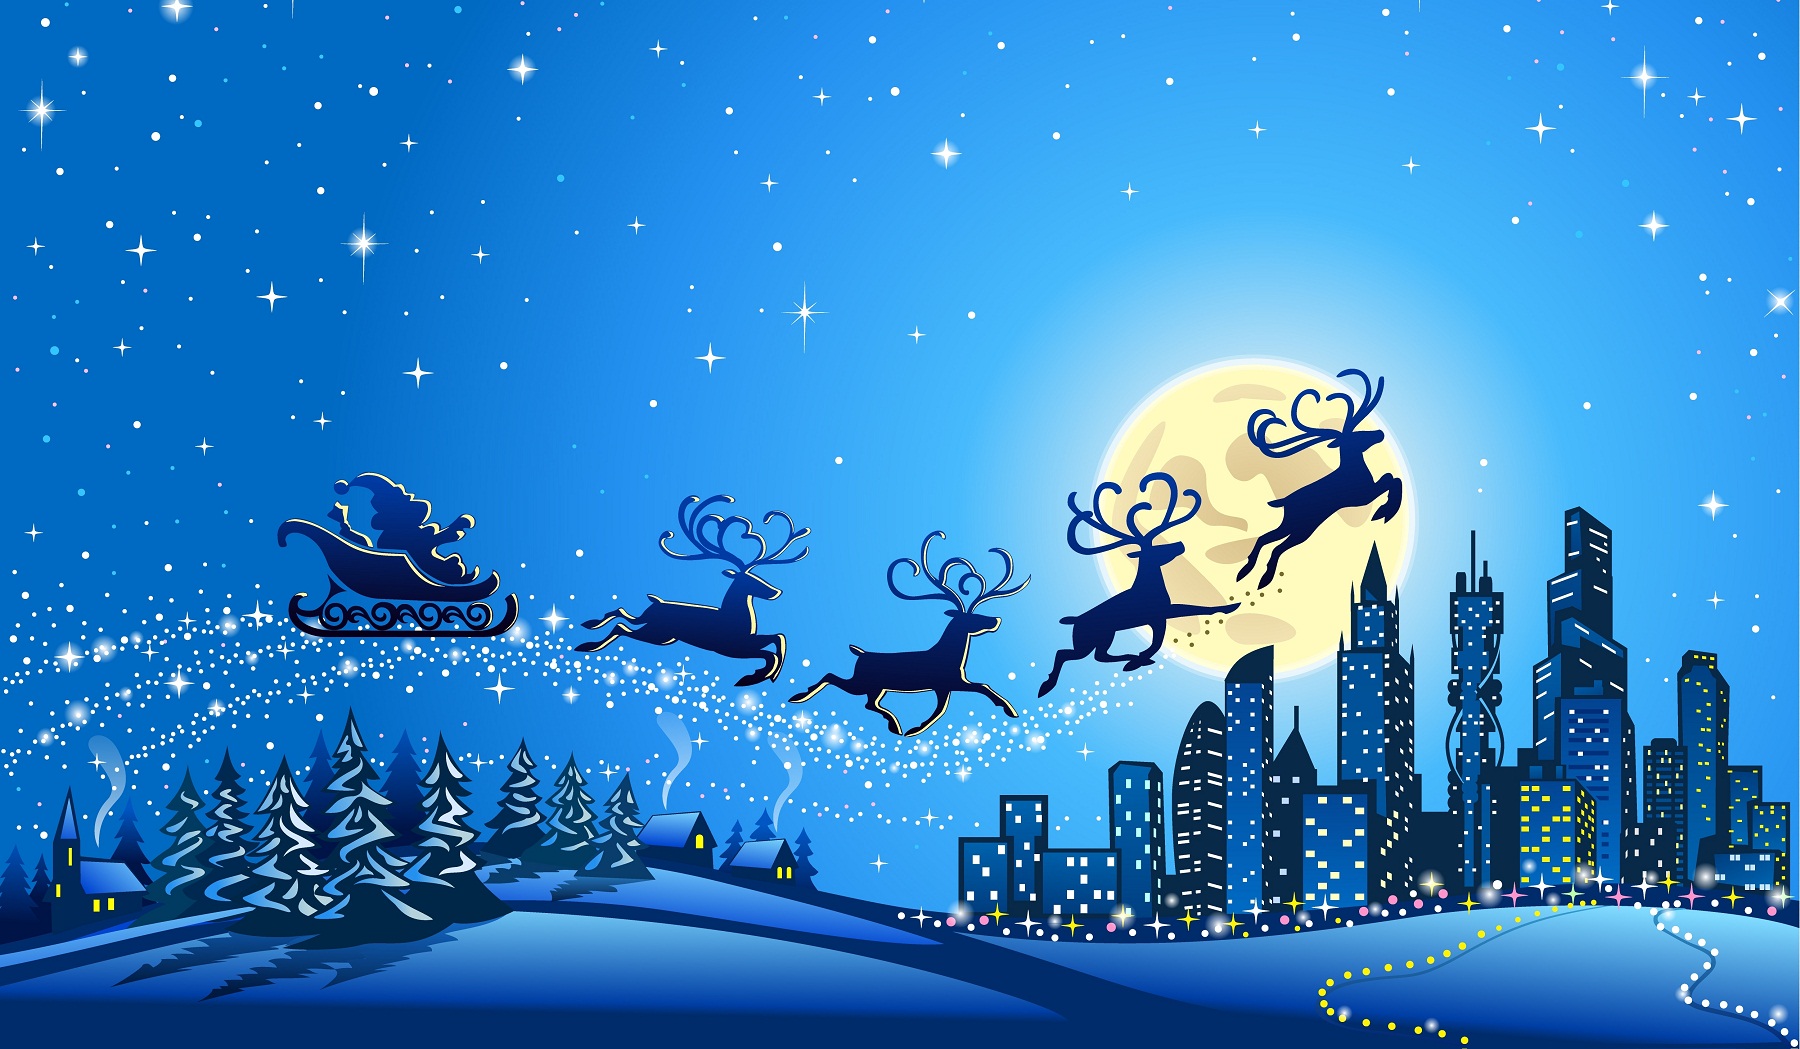 Christmas Reindeer Background Wallpaper Win10 Themes